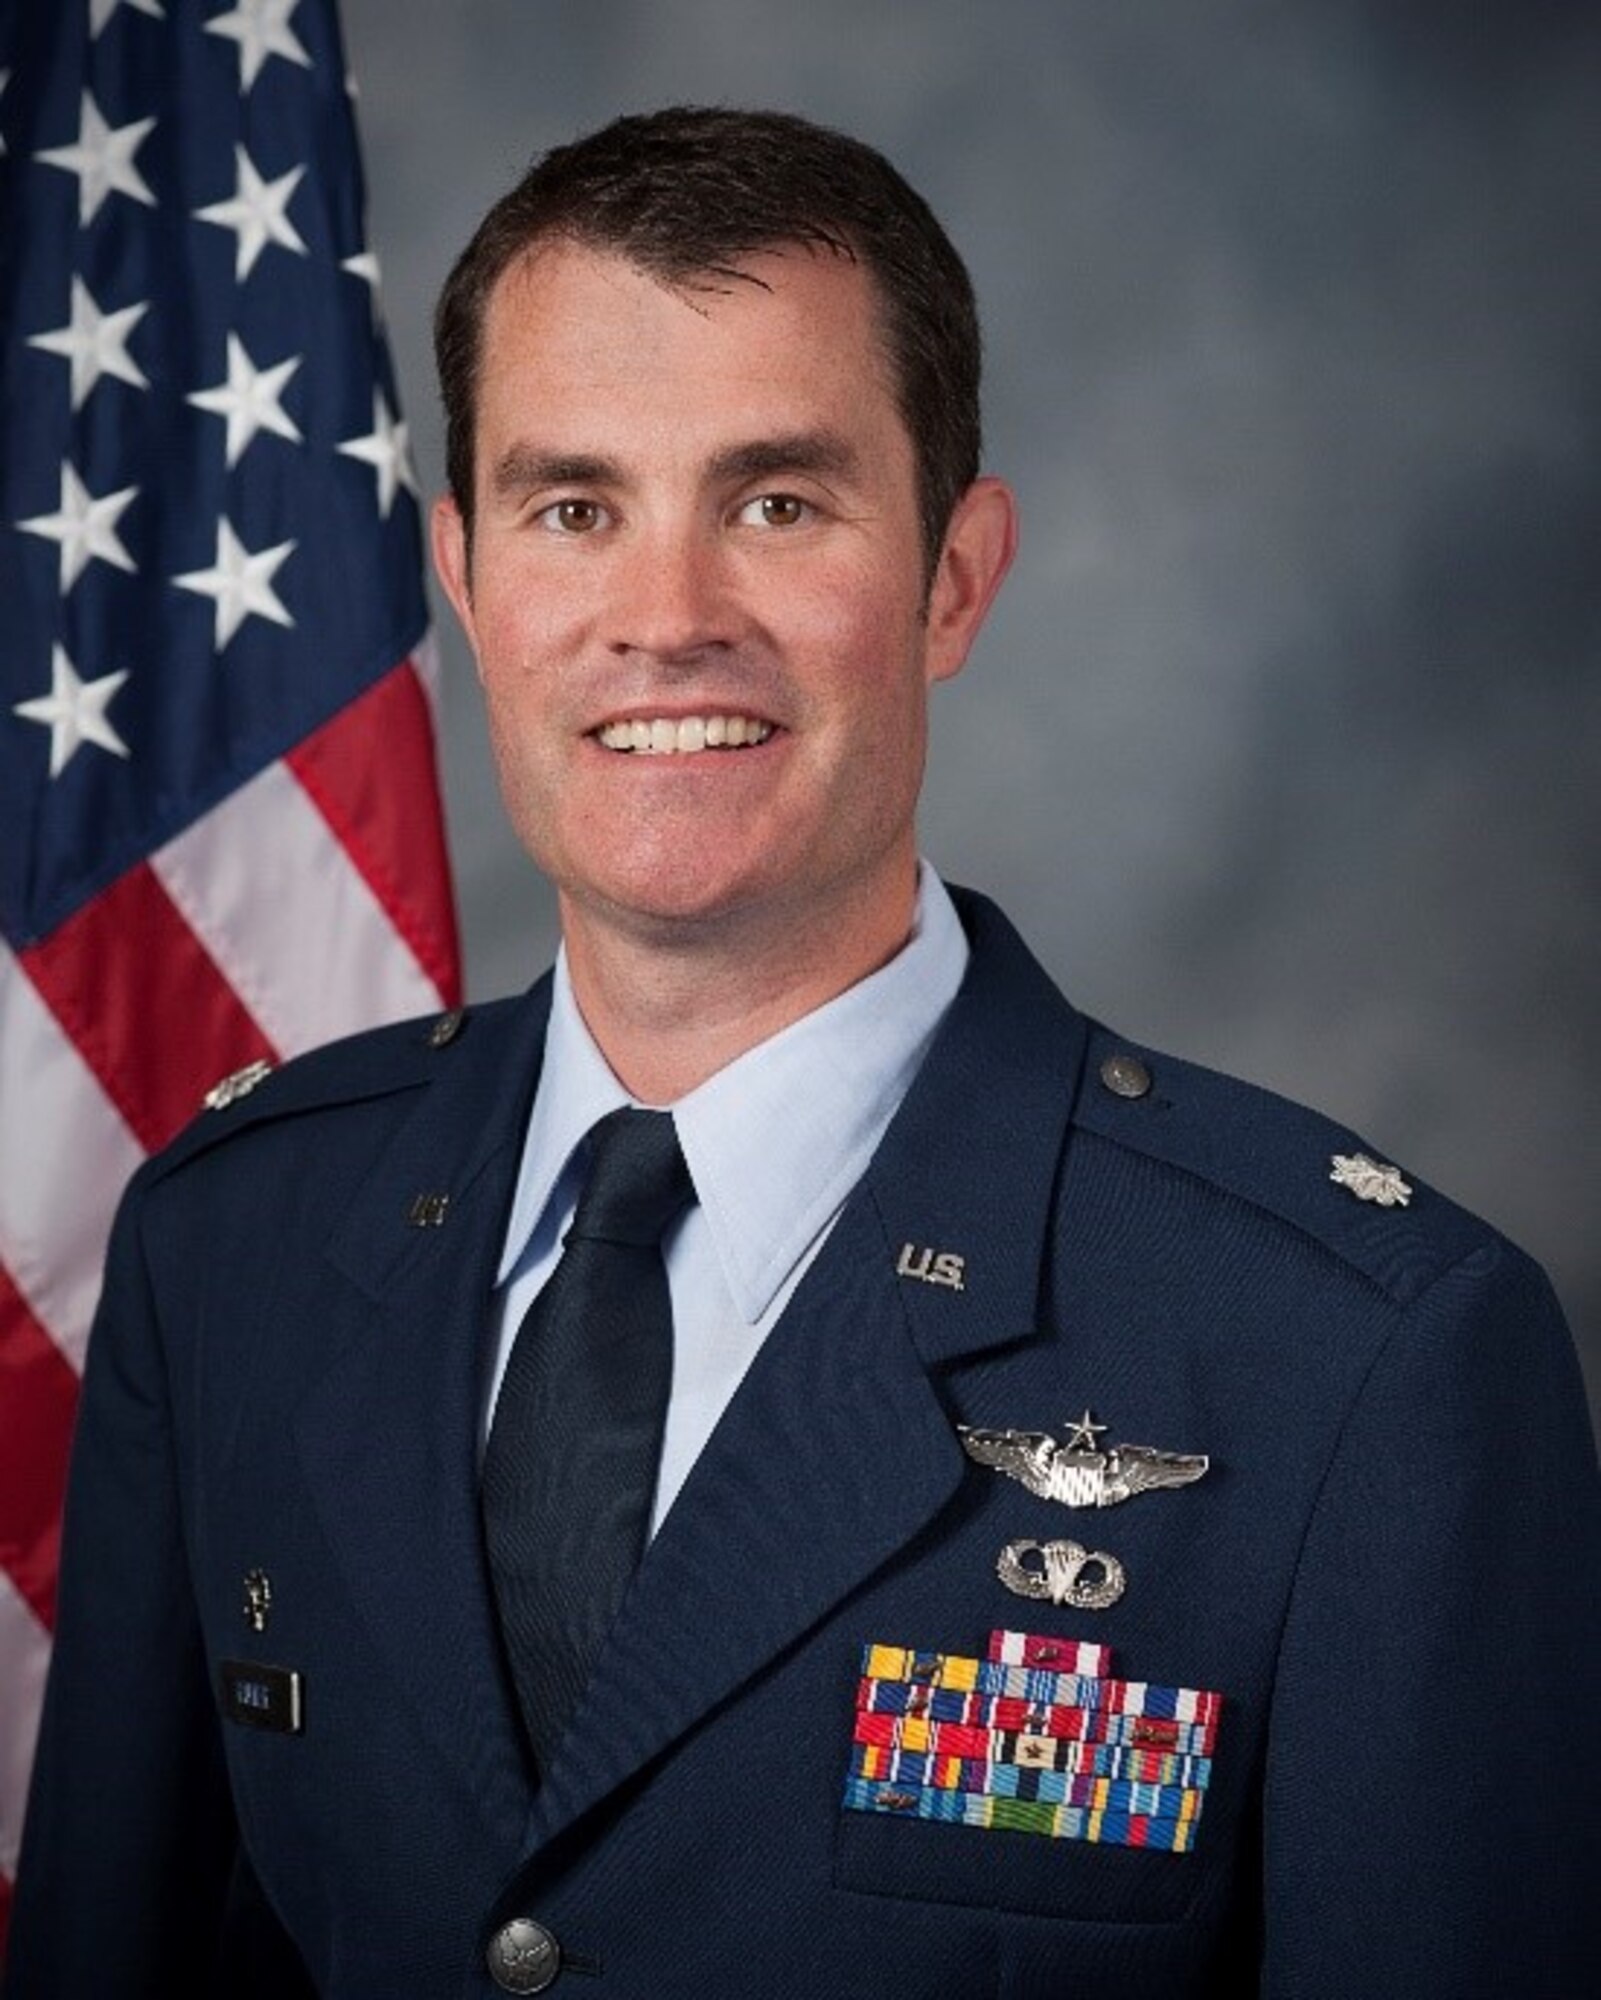 Lt. Col. Robert Rayner, 921st Contingency Response Squadron, shares some thoughts on leadership. (U.S. Air Force Courtesy Photo)